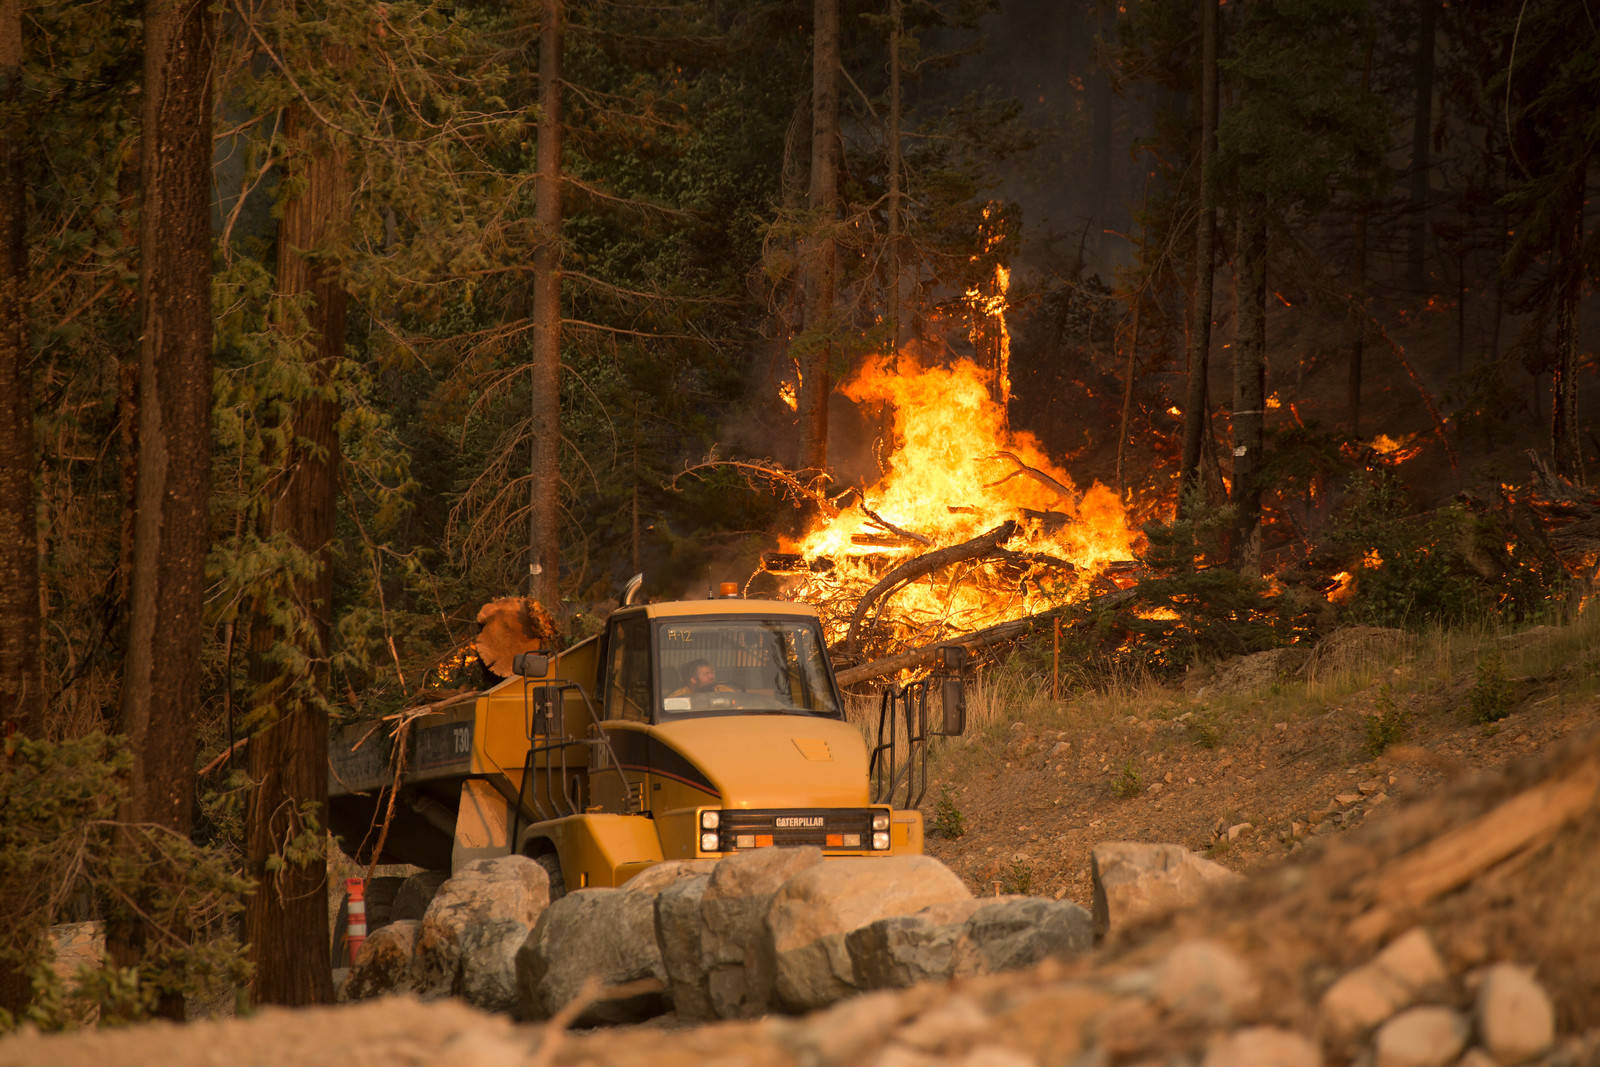 The 2015 Wolverine Fire in the Okanogan-Wenatchee National Forest near Lake Chelan. Photo courtesy of the Washington Department of Natural Resources.